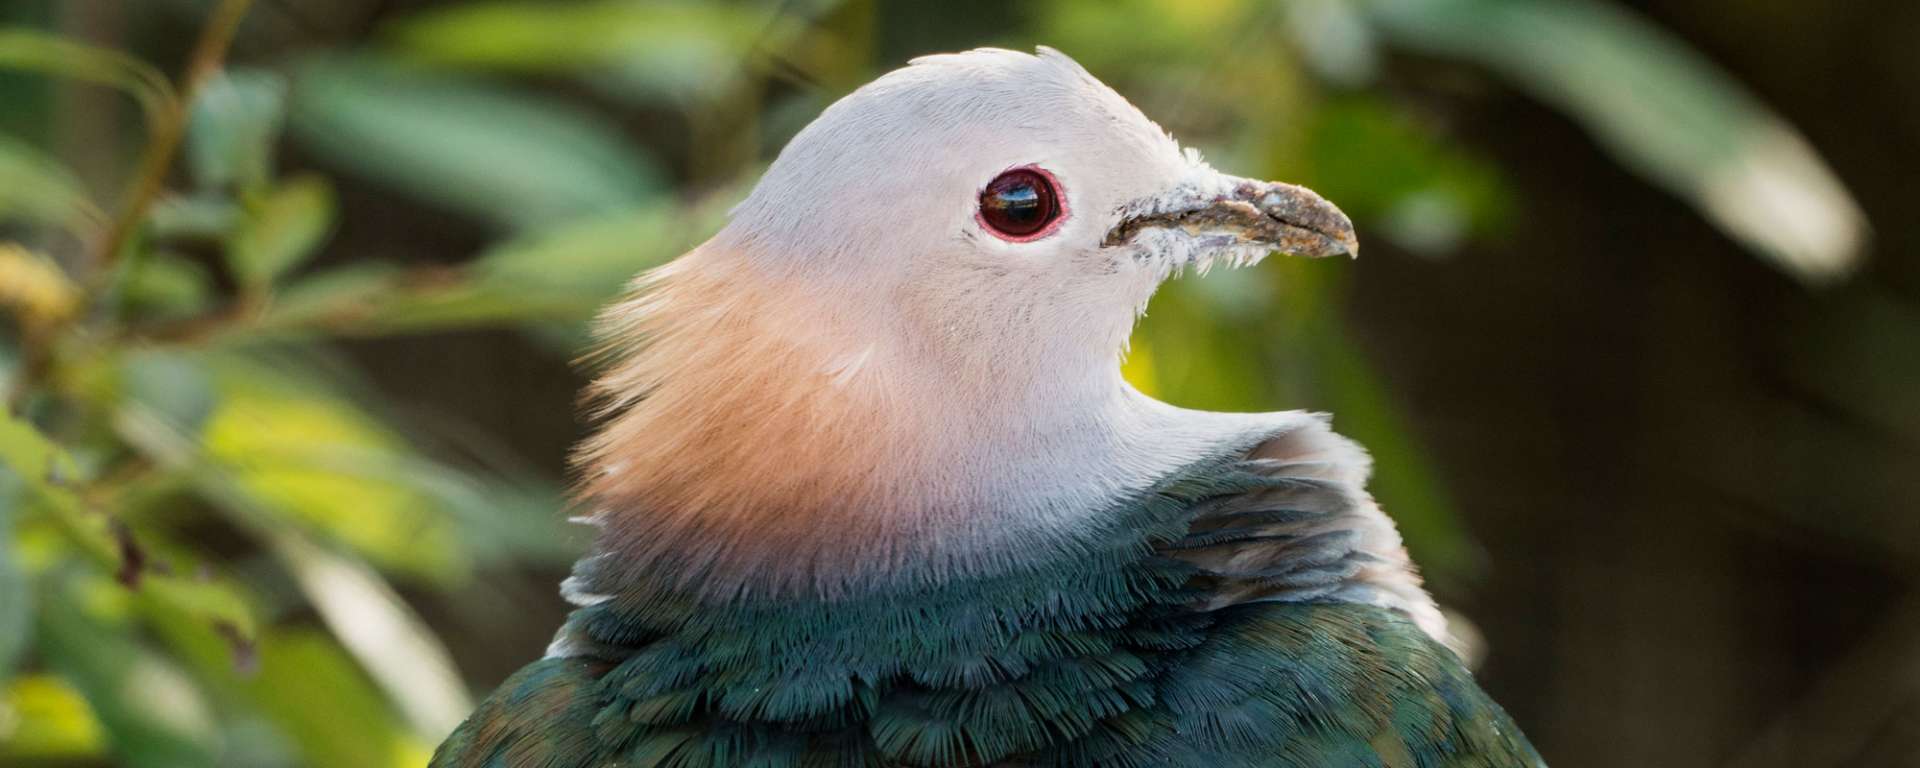 Green Imperial Pigeon by Charlie Morey